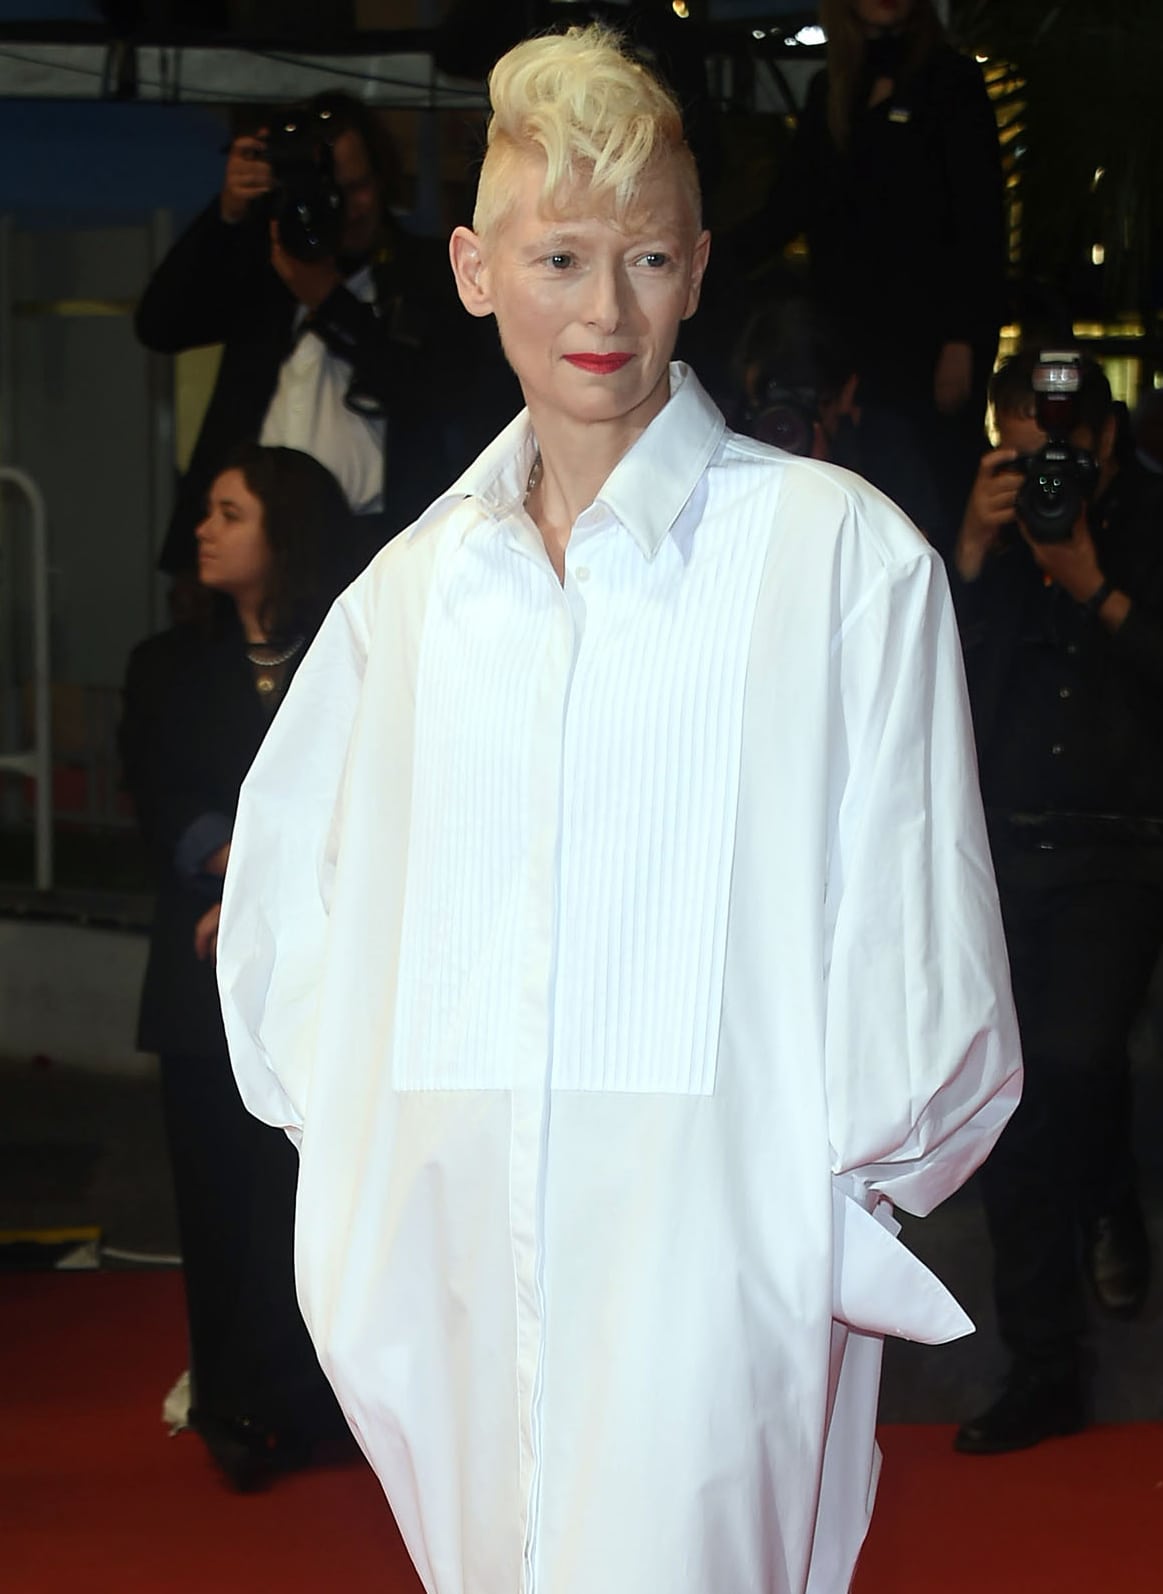 Tilda Swinton's oversized white shirt dress features a pleated front bib and a mermaid-style ruffled hem